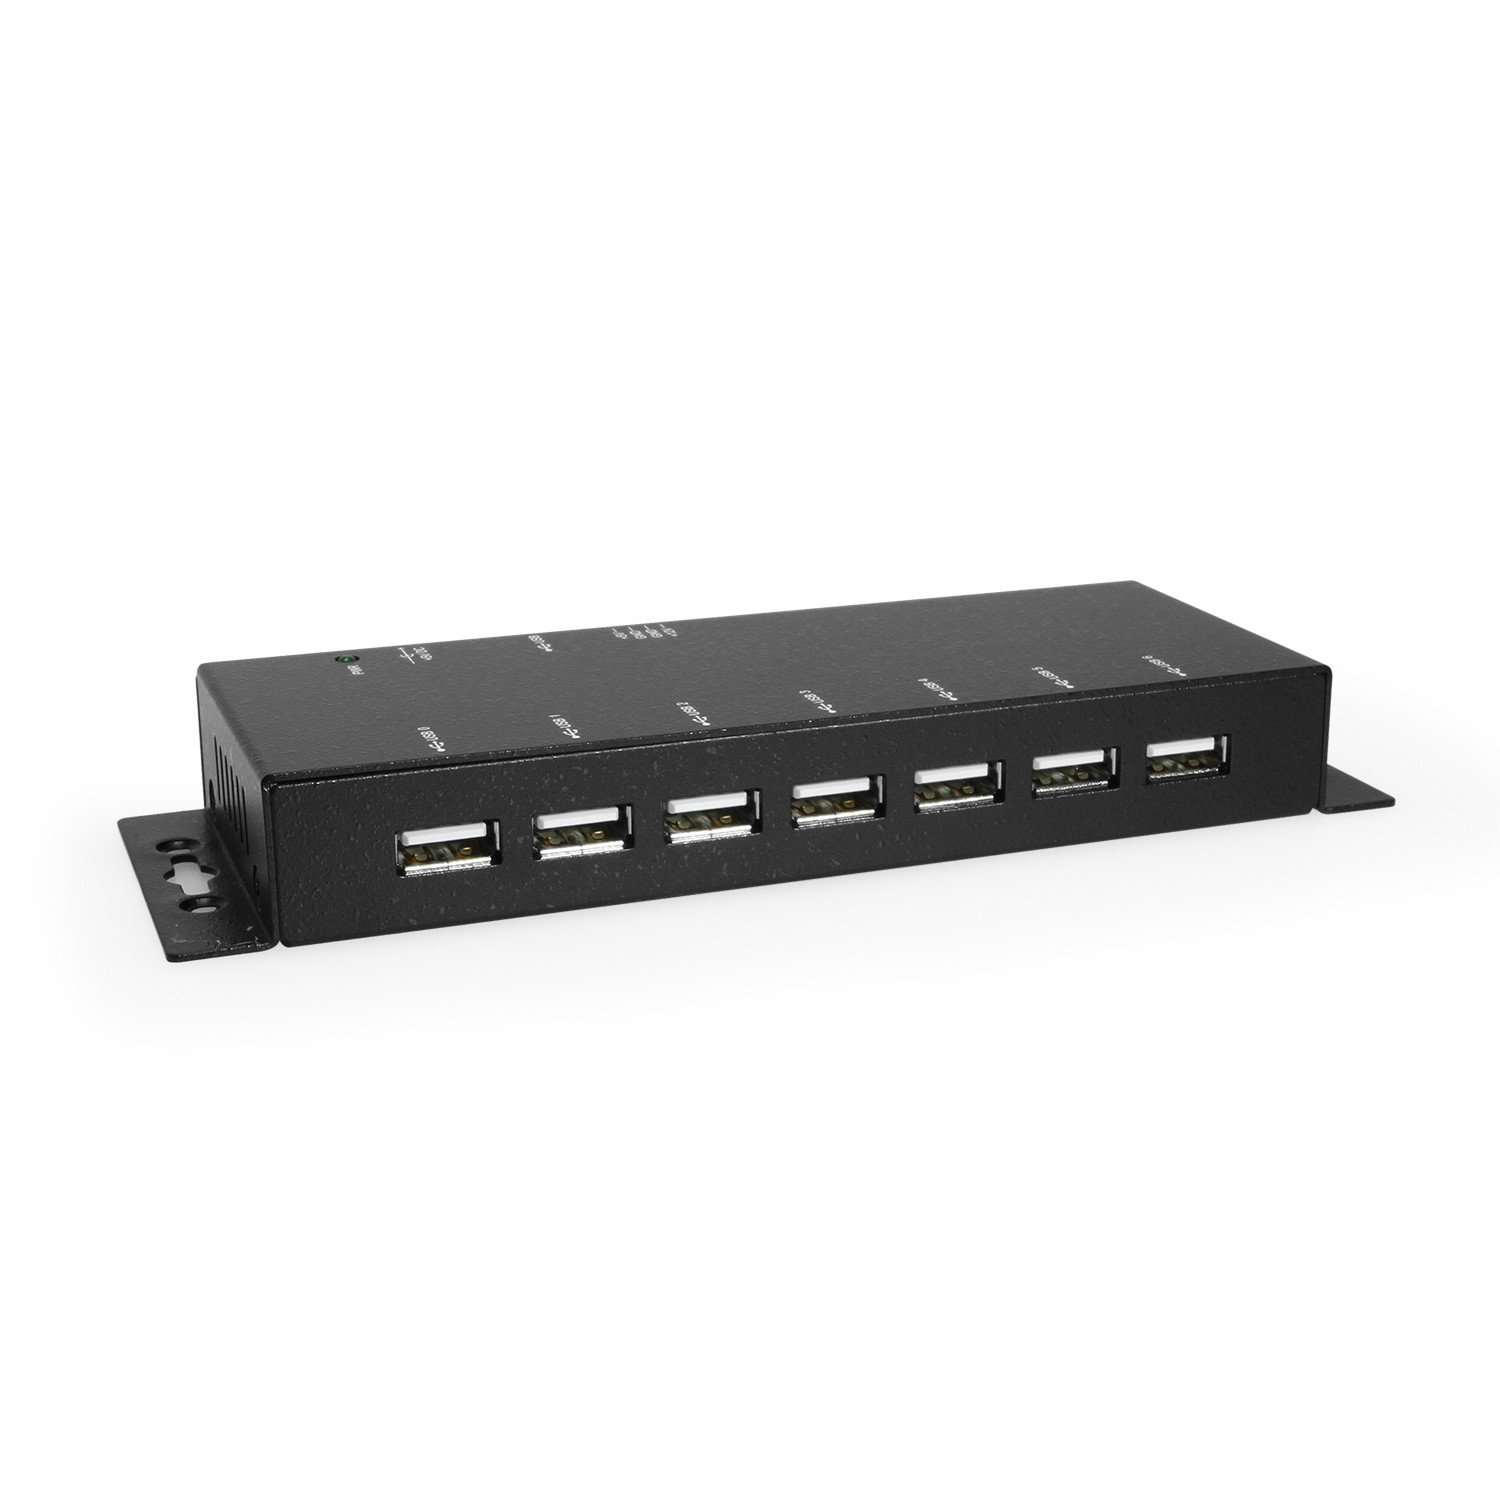 Metal 7-Port USB 2.0 Powered Hub for PC-MAC with Power Adapter